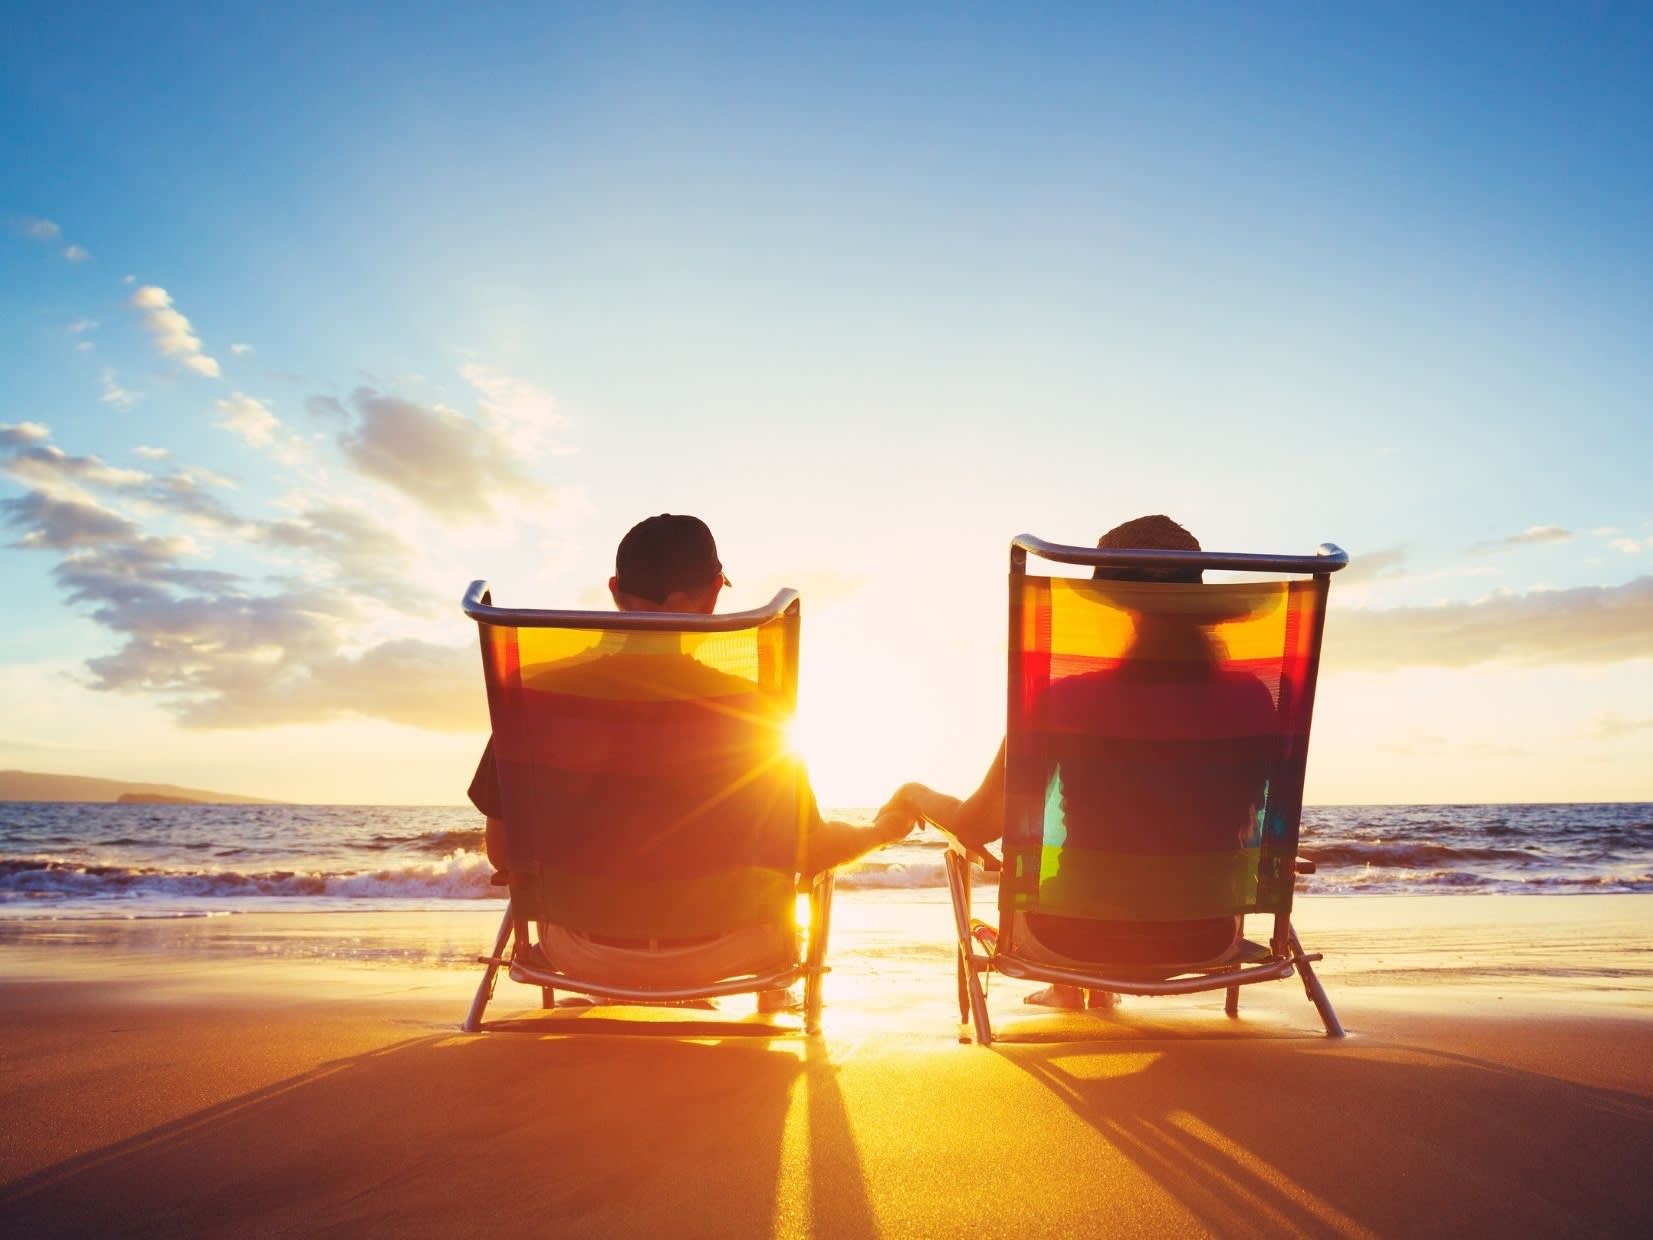 An old couple sitting together on a beach at sunset.